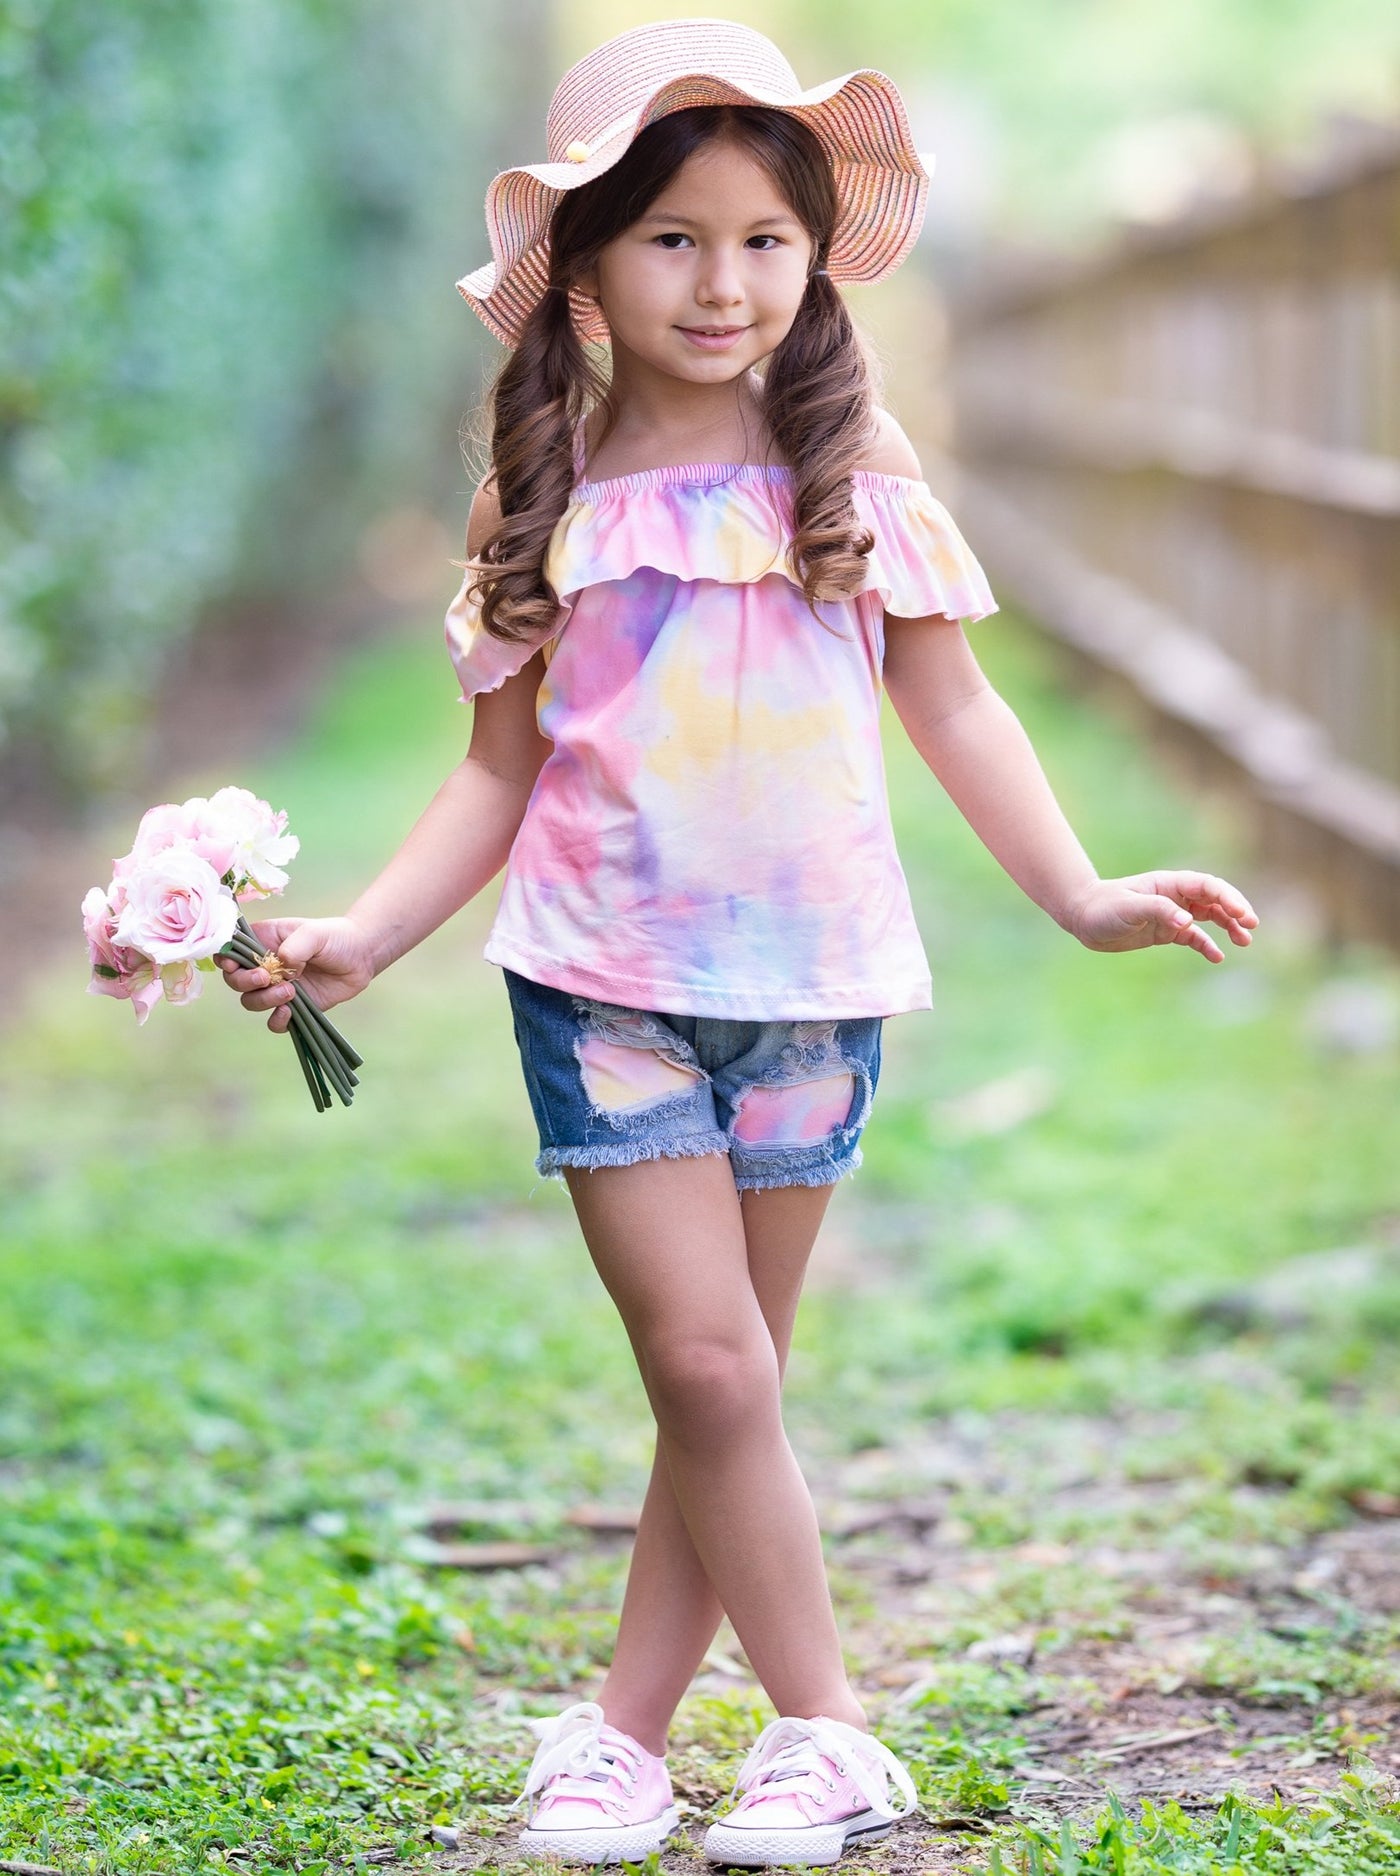 Girl Spring set features a cold-shoulder tie-dye top with matching patched denim shorts 2T-10Y